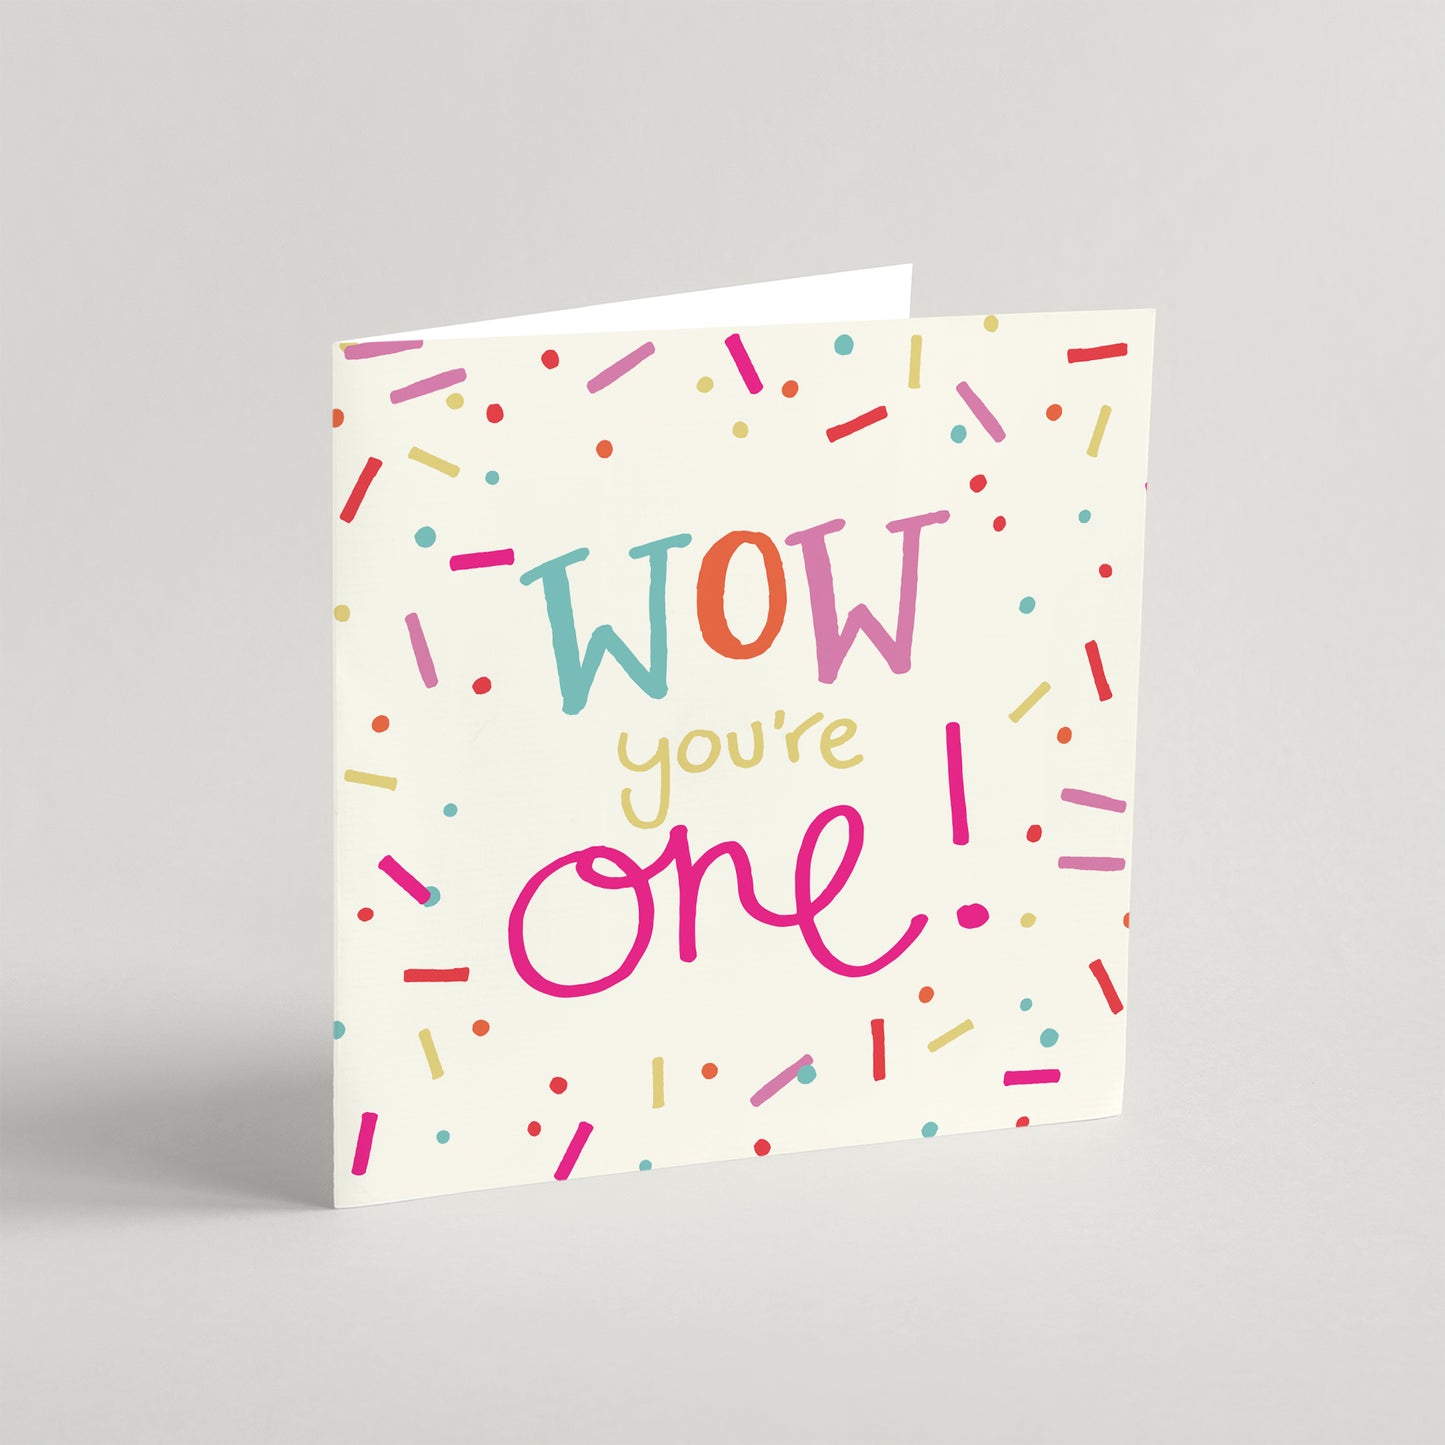 'Wow You're One' Greeting Card & Envelope - Pink